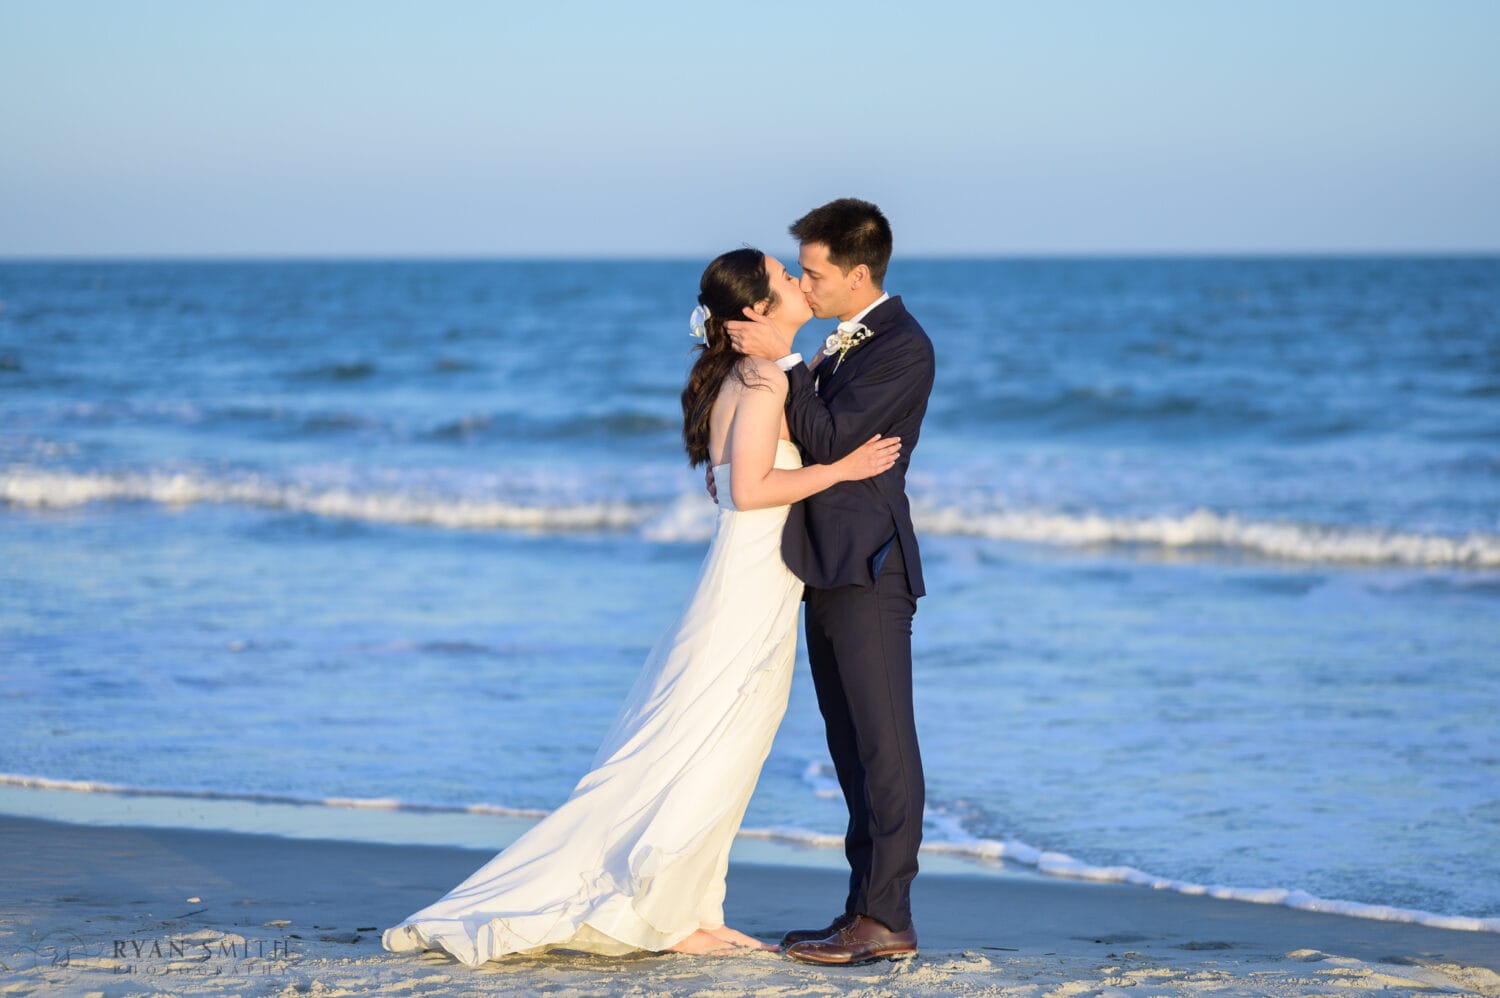 Kiss in front of the ocean - Cherry Grove Point - North Myrtle Beach